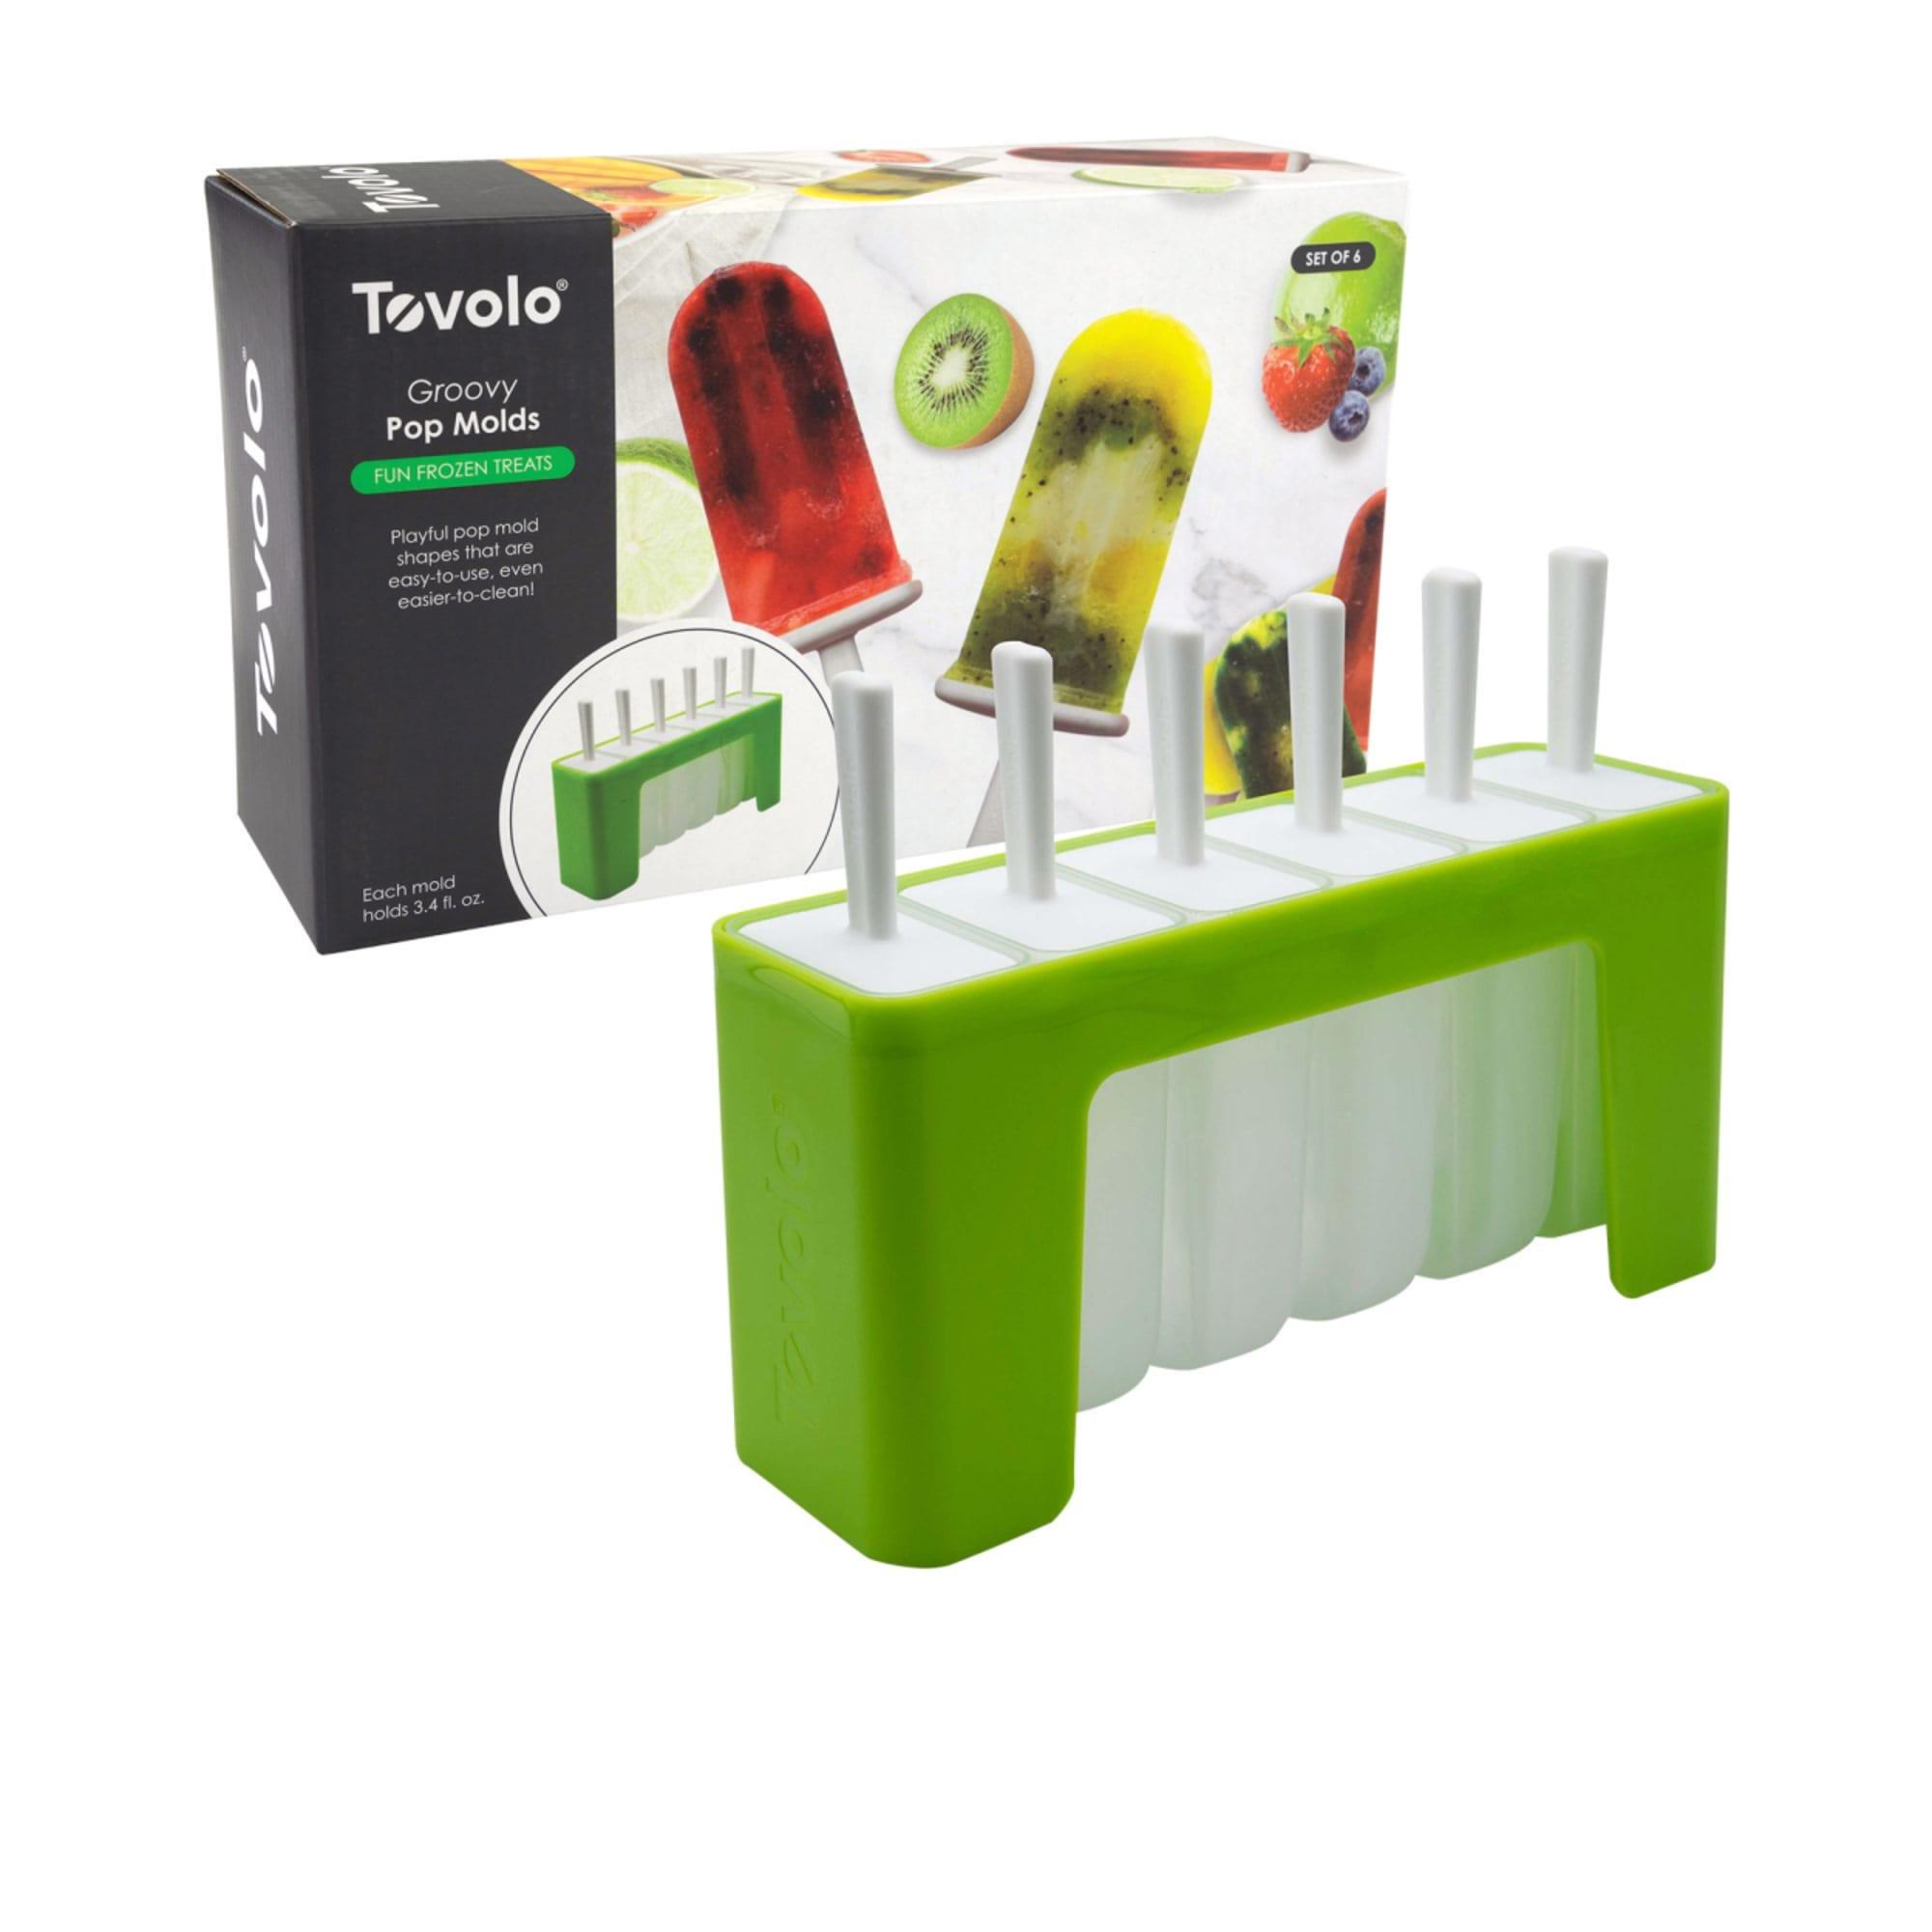 Tovolo Groovy Pop Mould with Stand Set of 6 Image 8